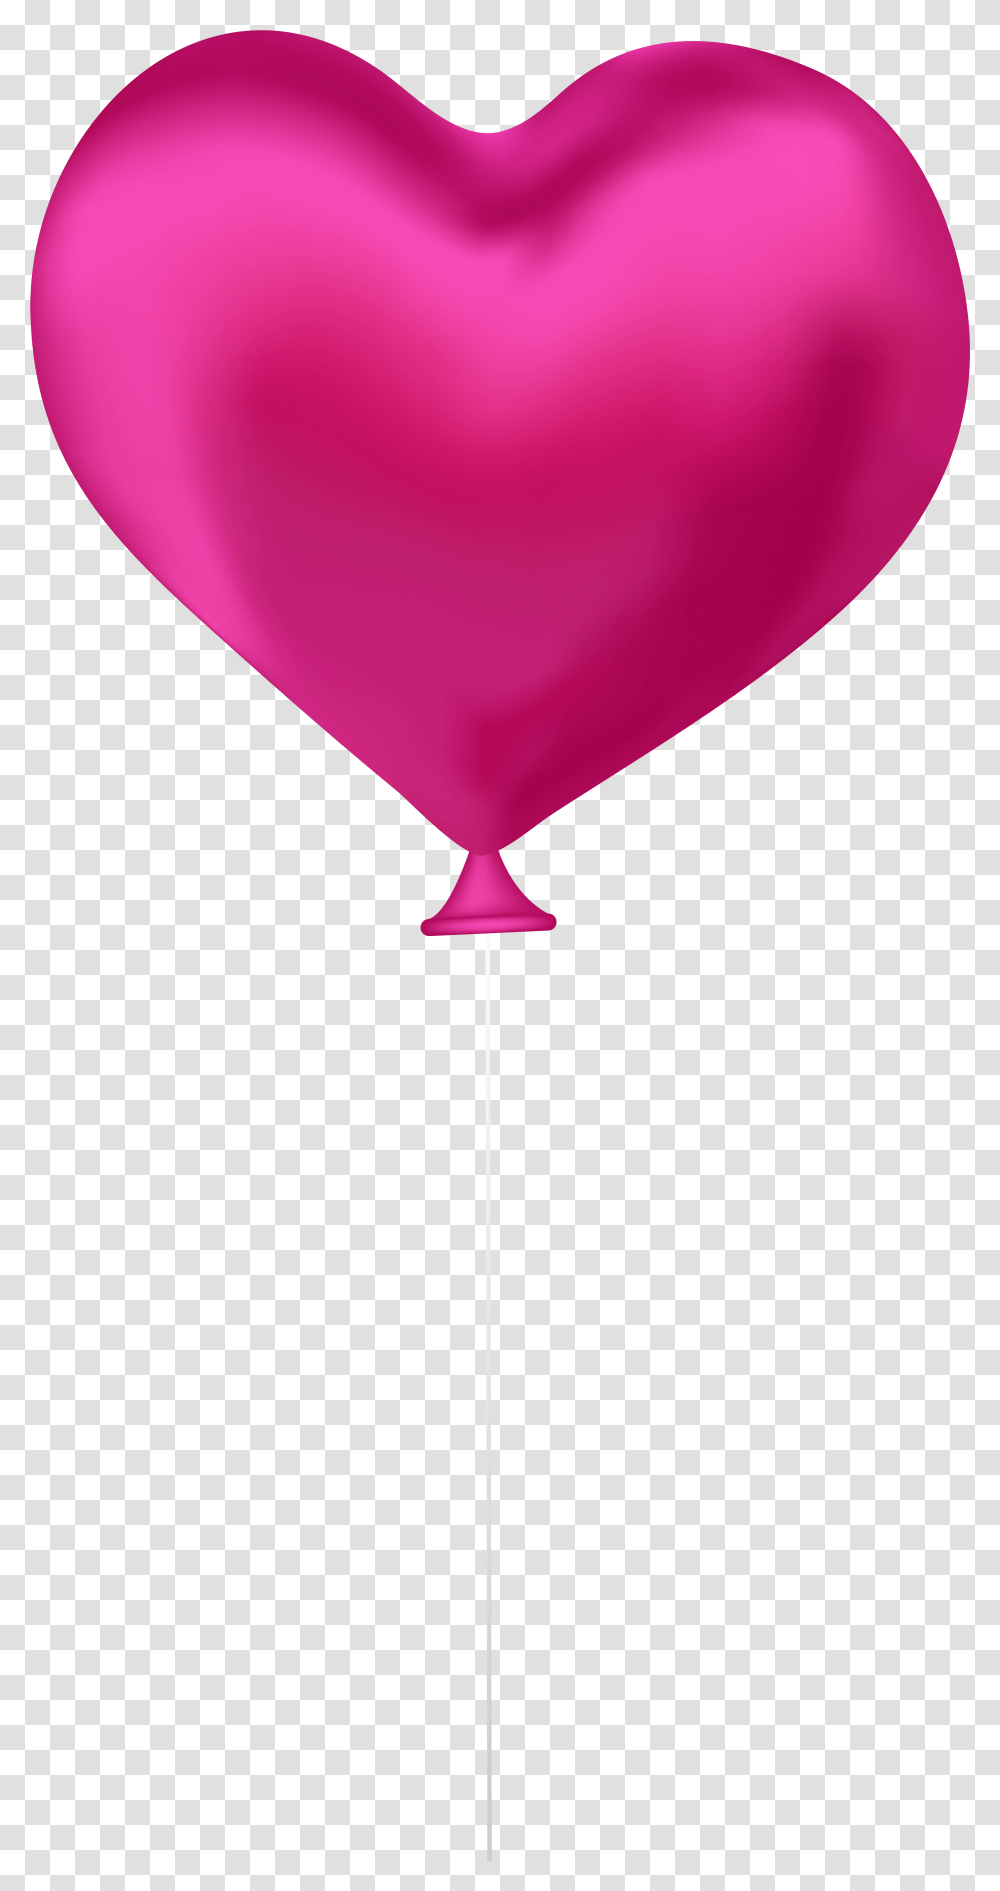 Library Of Pink Heart Graphic Black And Red Heart Balloon, Lamp, Pattern Transparent Png